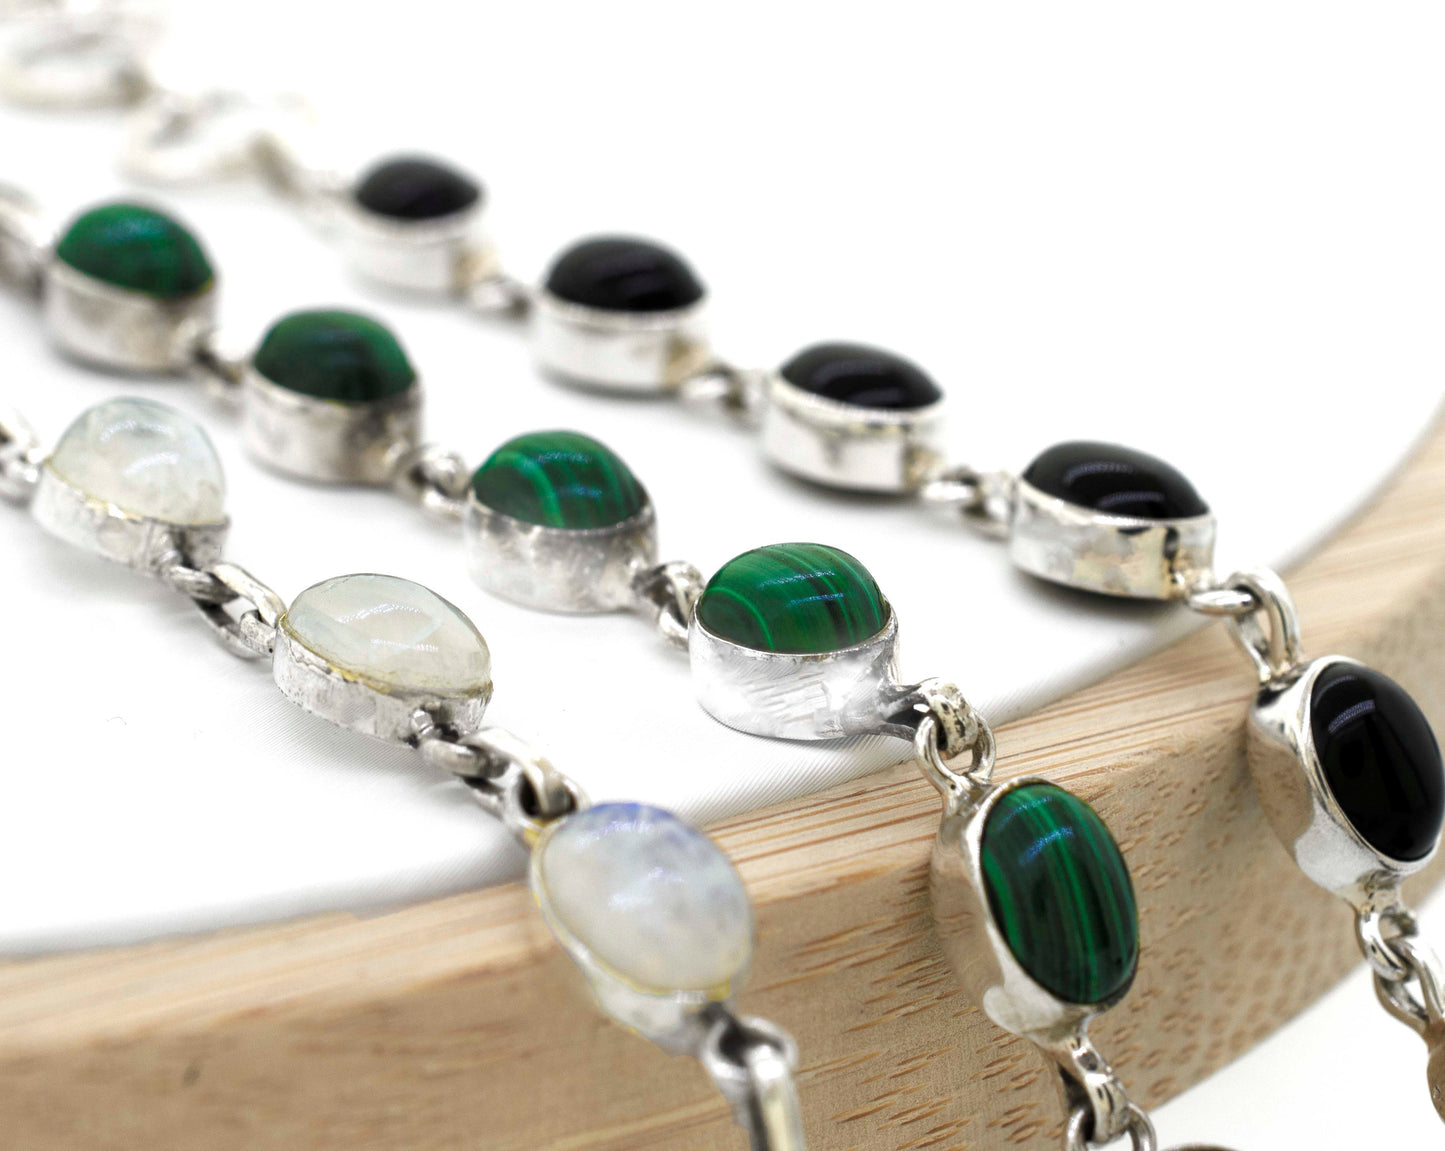 A Simple Oval Gemstone Bracelet with Super Silver stones.